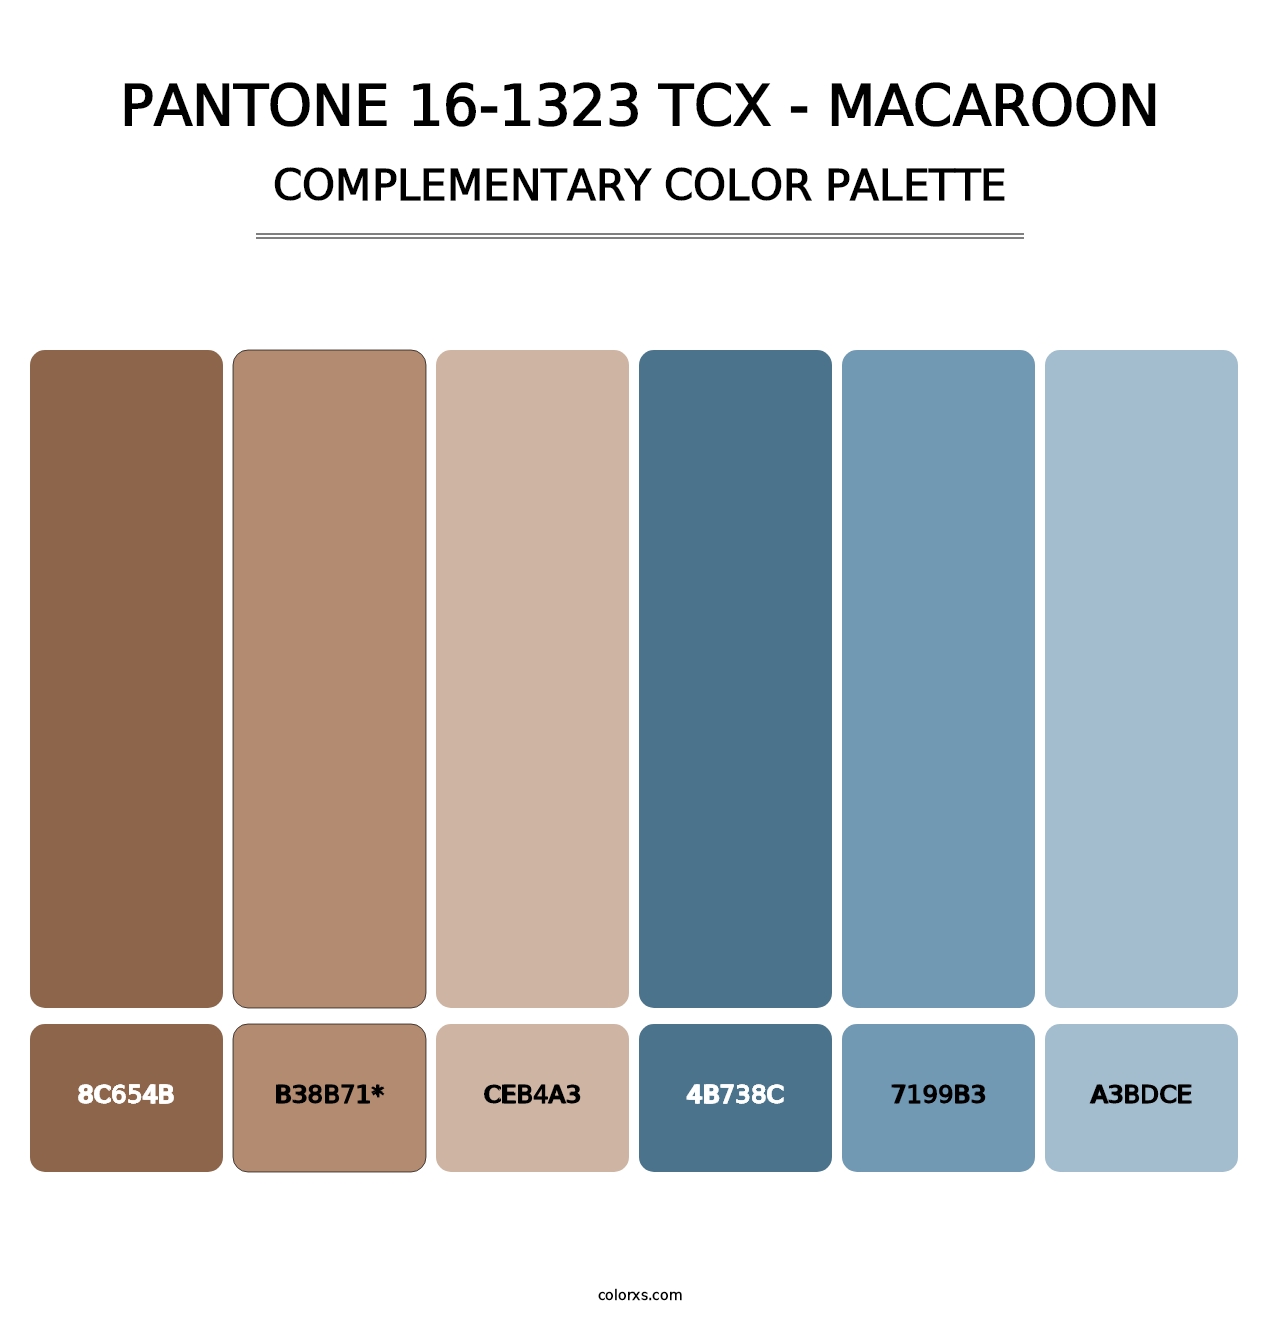 PANTONE 16-1323 TCX - Macaroon - Complementary Color Palette